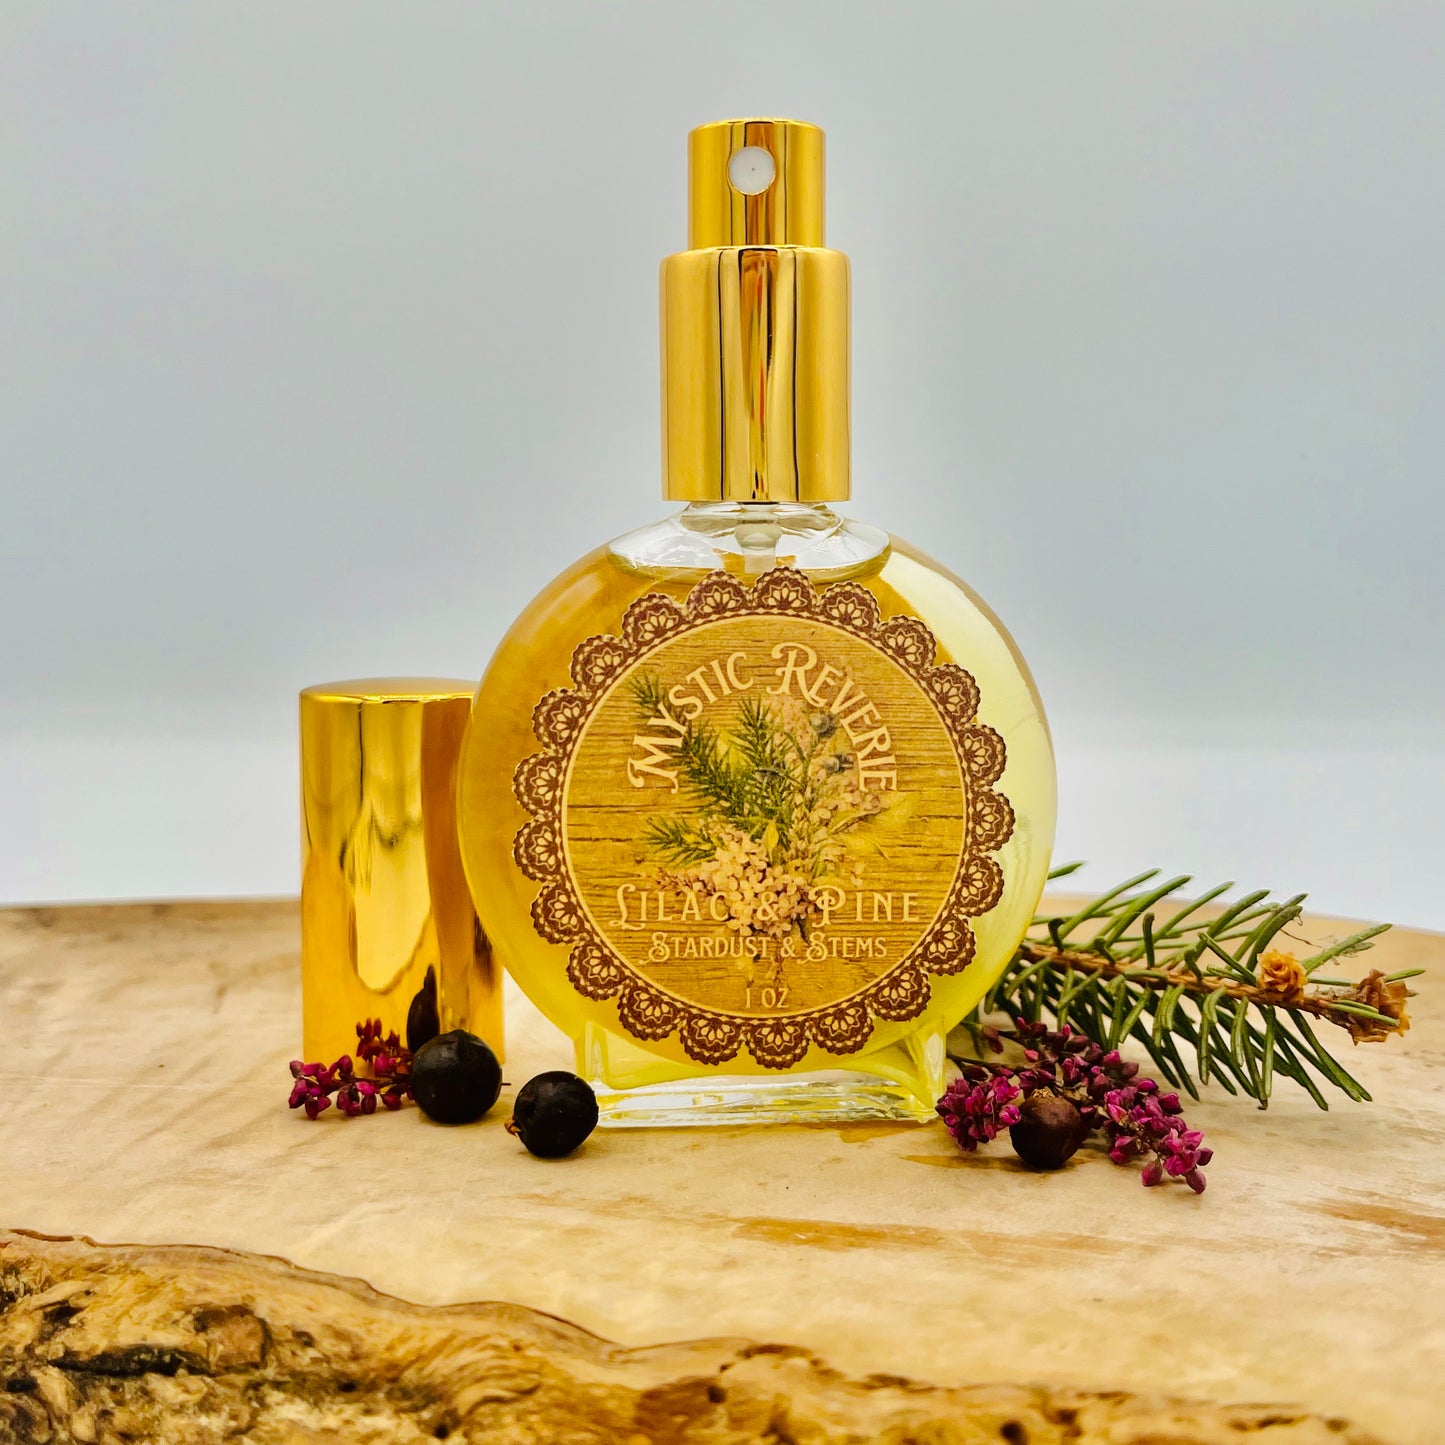 MYSTIC REVERIE Lilac and Pine Perfume with Juniper, Benzoin and Copaiba Essential Oil, Magical Perfume for Strength & Resilience, Woodland Faery Perfume Gift